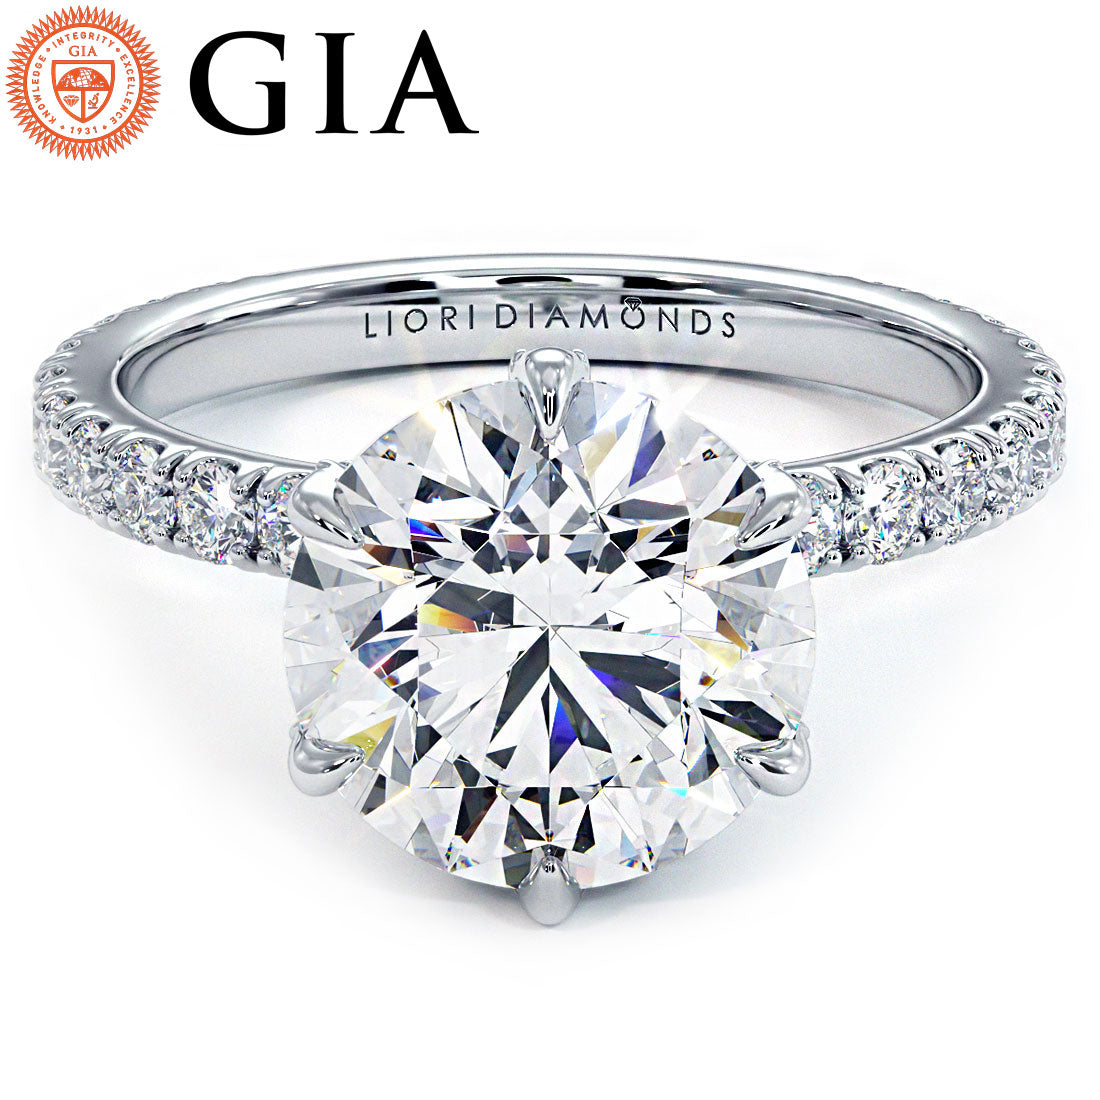 3.73ctw GIA Certified Round Brilliant Micropavé 6 Prong Petite Lab Grown Diamond Engagement Ring 14k White Gold